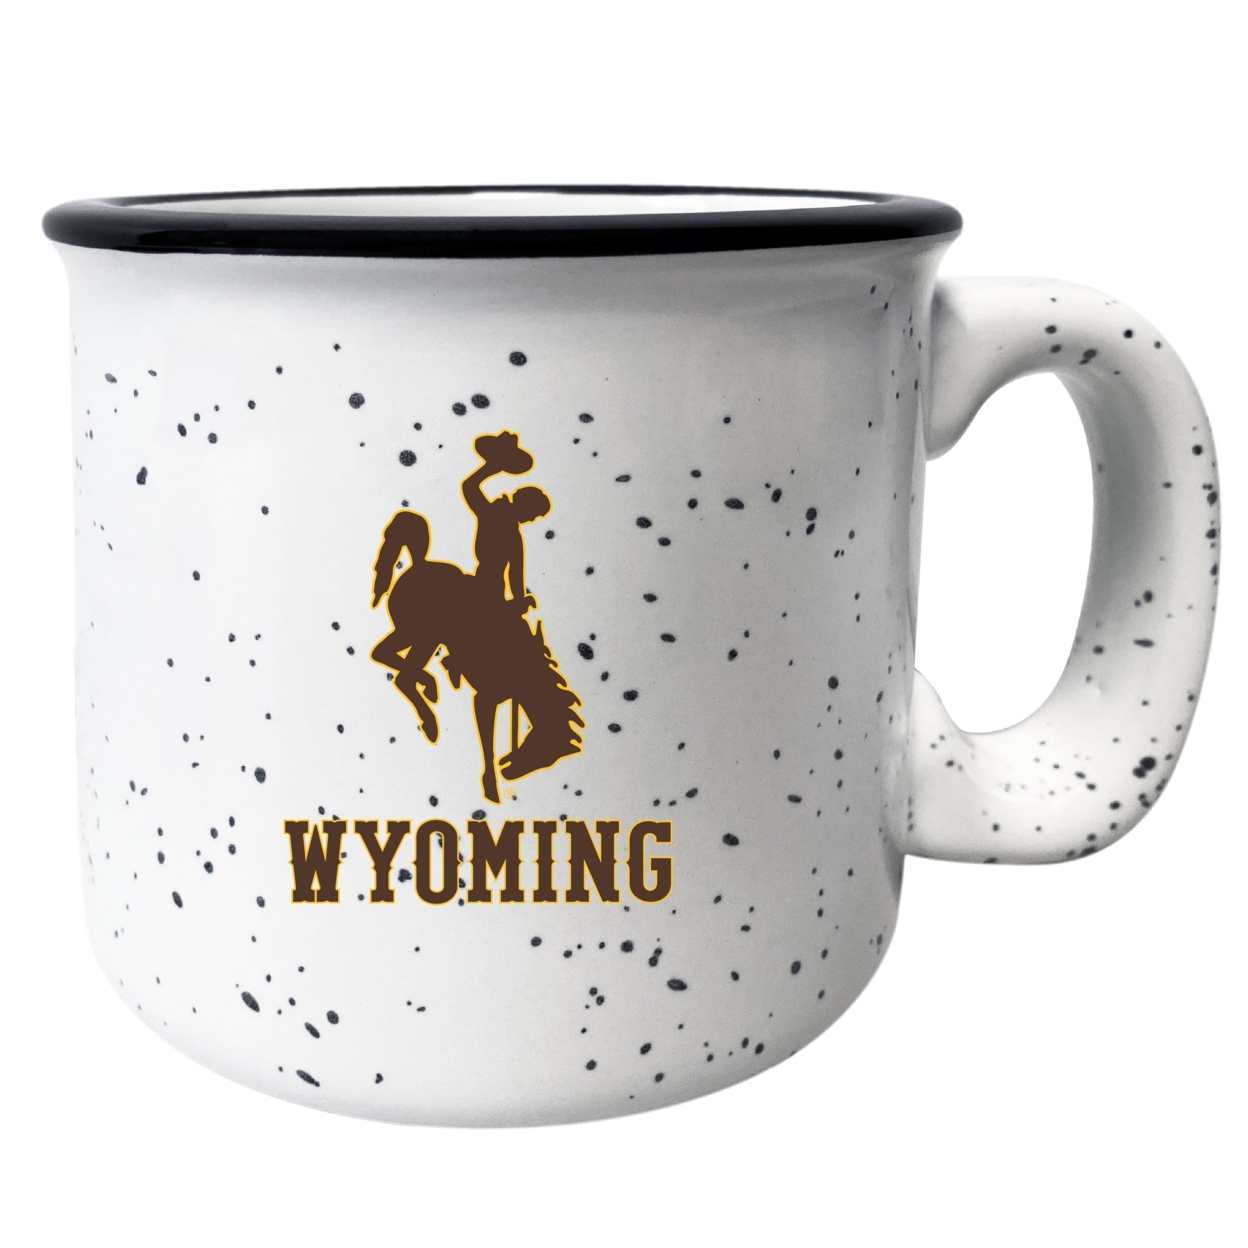 University Of Wyoming Speckled Ceramic Camper Coffee Mug - Choose Your Color - Gray